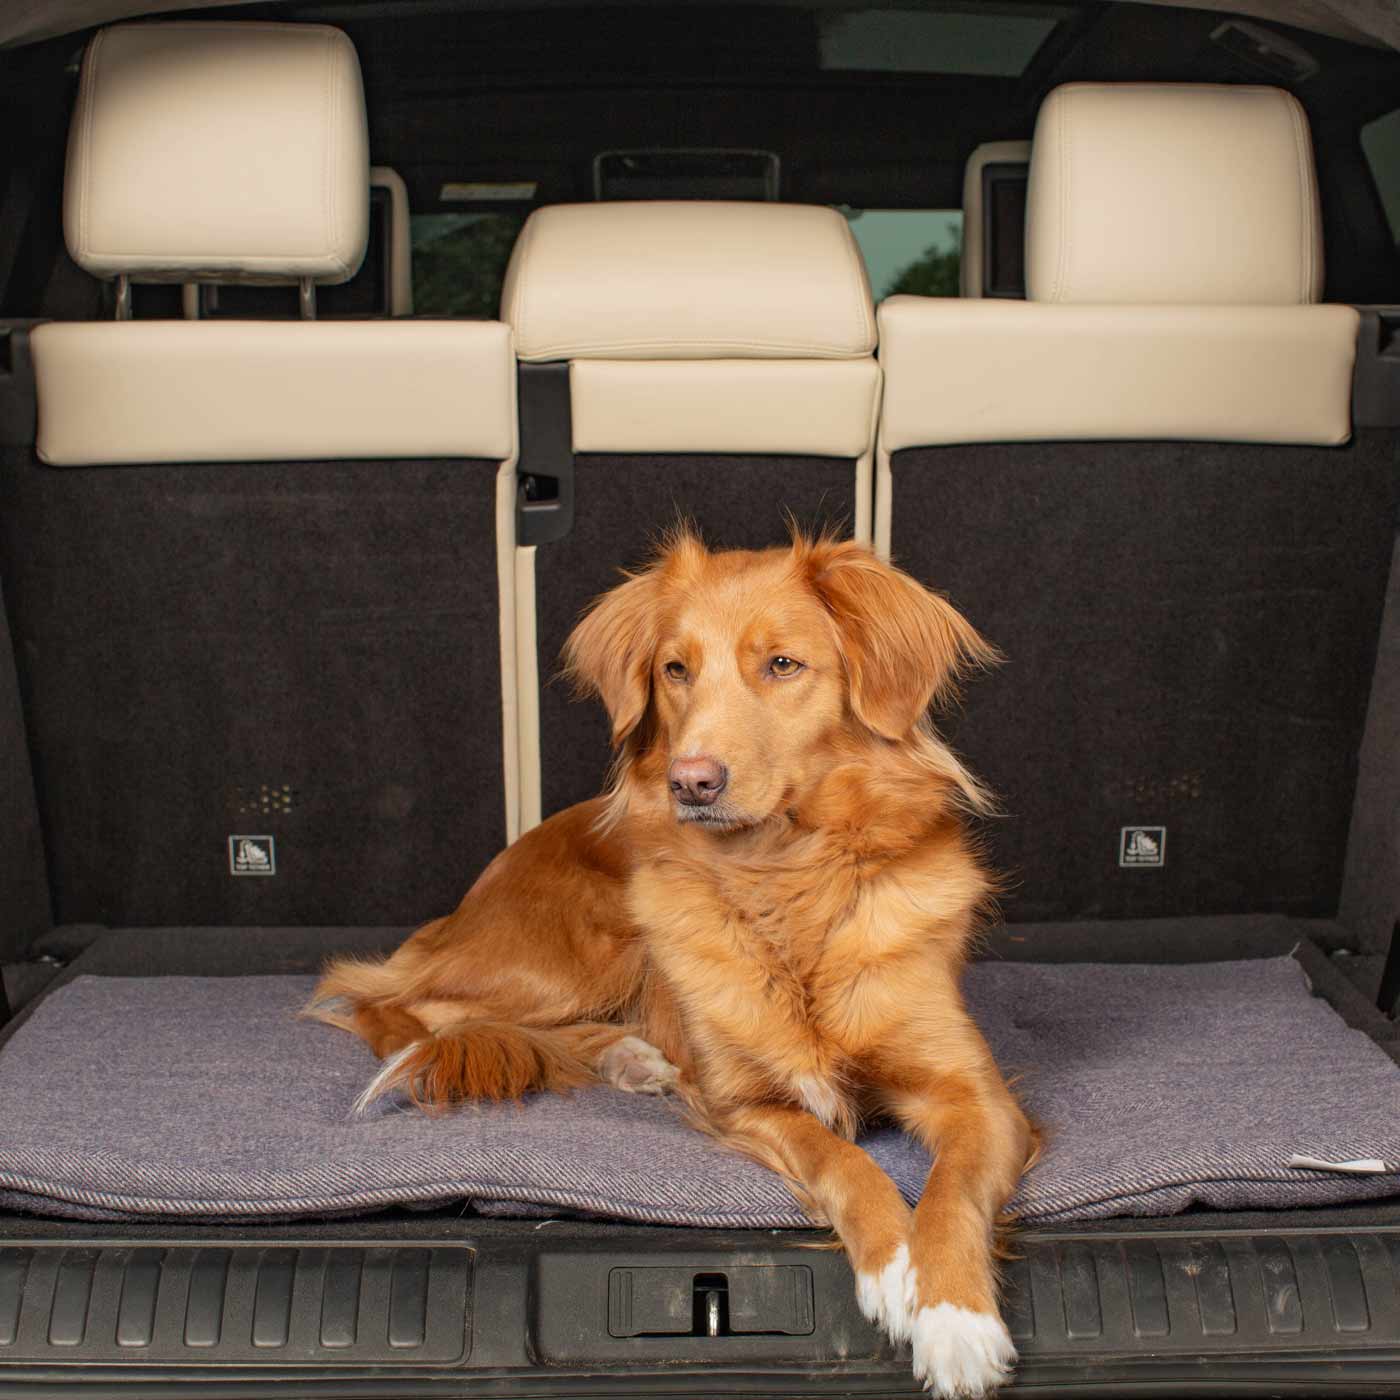 Embark on the perfect pet travel with our luxury Travel Mat in Oxford Herringbone. Featuring a Carry handle for on the move once Rolled up for easy storage, can be used as a seat cover, boot mat or travel bed! Available now at Lords & Labradors